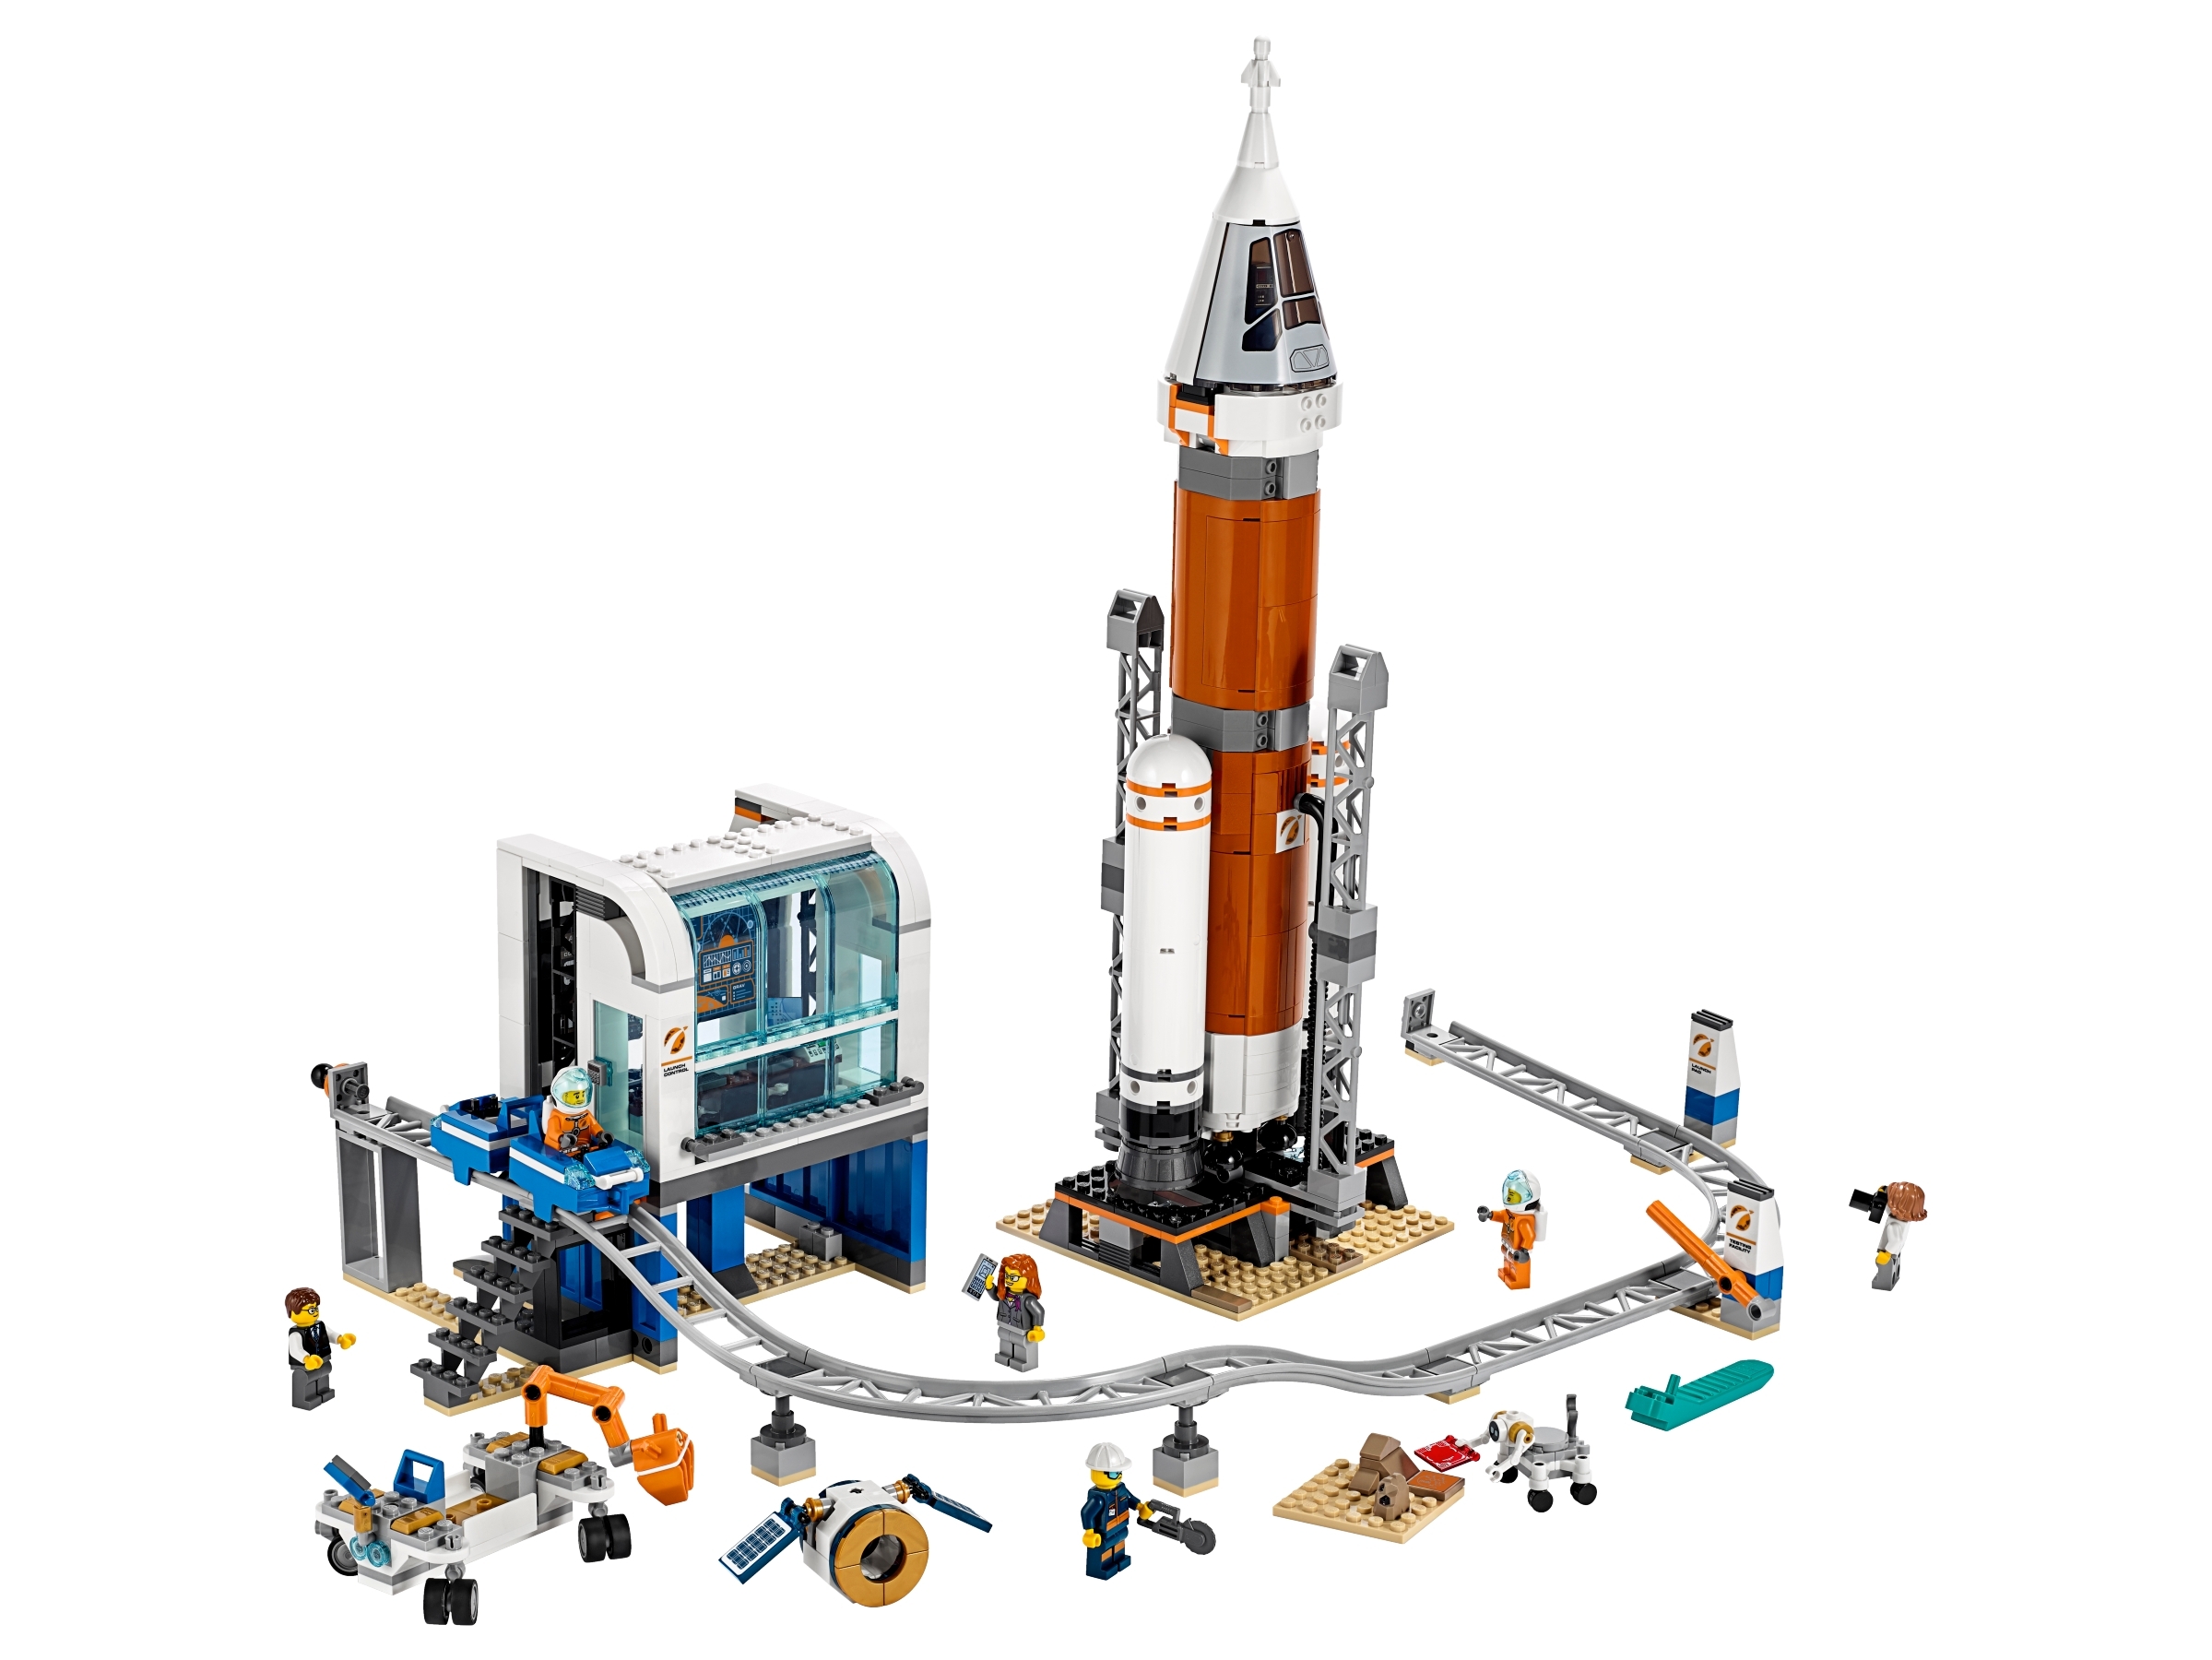 lego city deep space rocket and launch control 60228